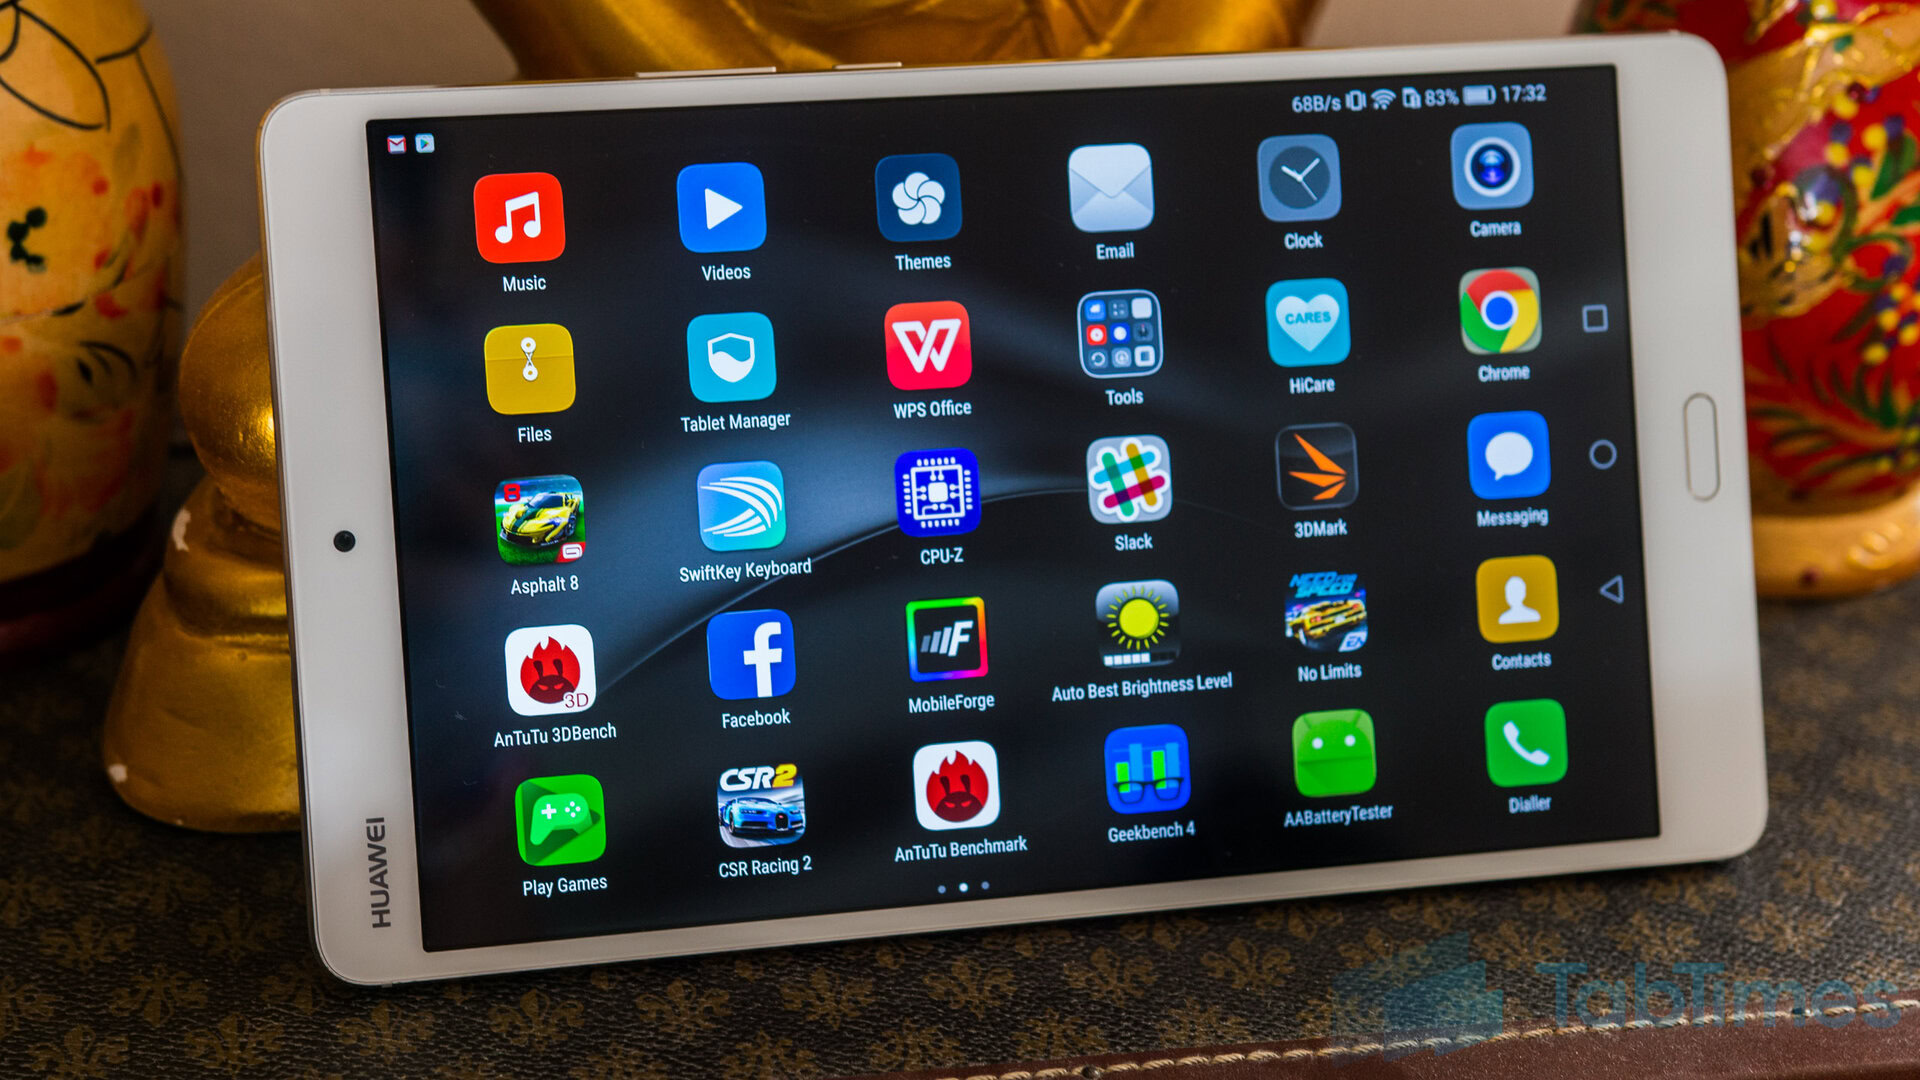 Sandy Opa Slecht HUAWEI MediaPad M3 review - the best Android tablet? - Android Authority